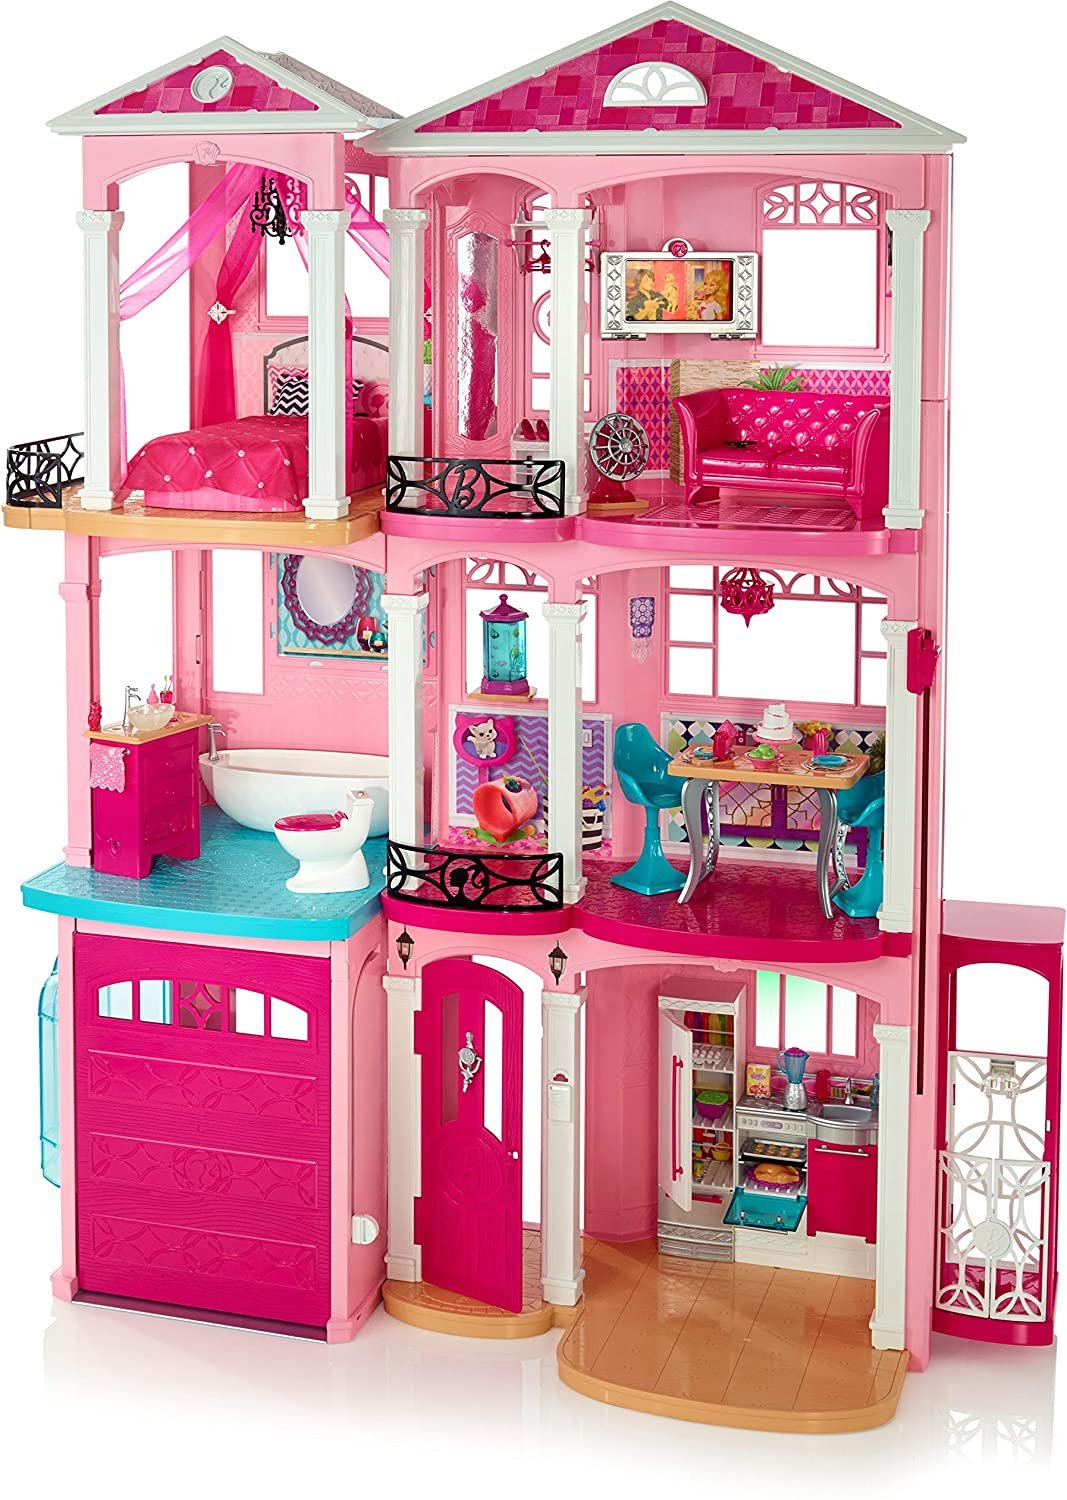 New Mattel Barbie 3 Story Pink Furnished Doll Town House Dreamhouse Townhouse Exclusive 